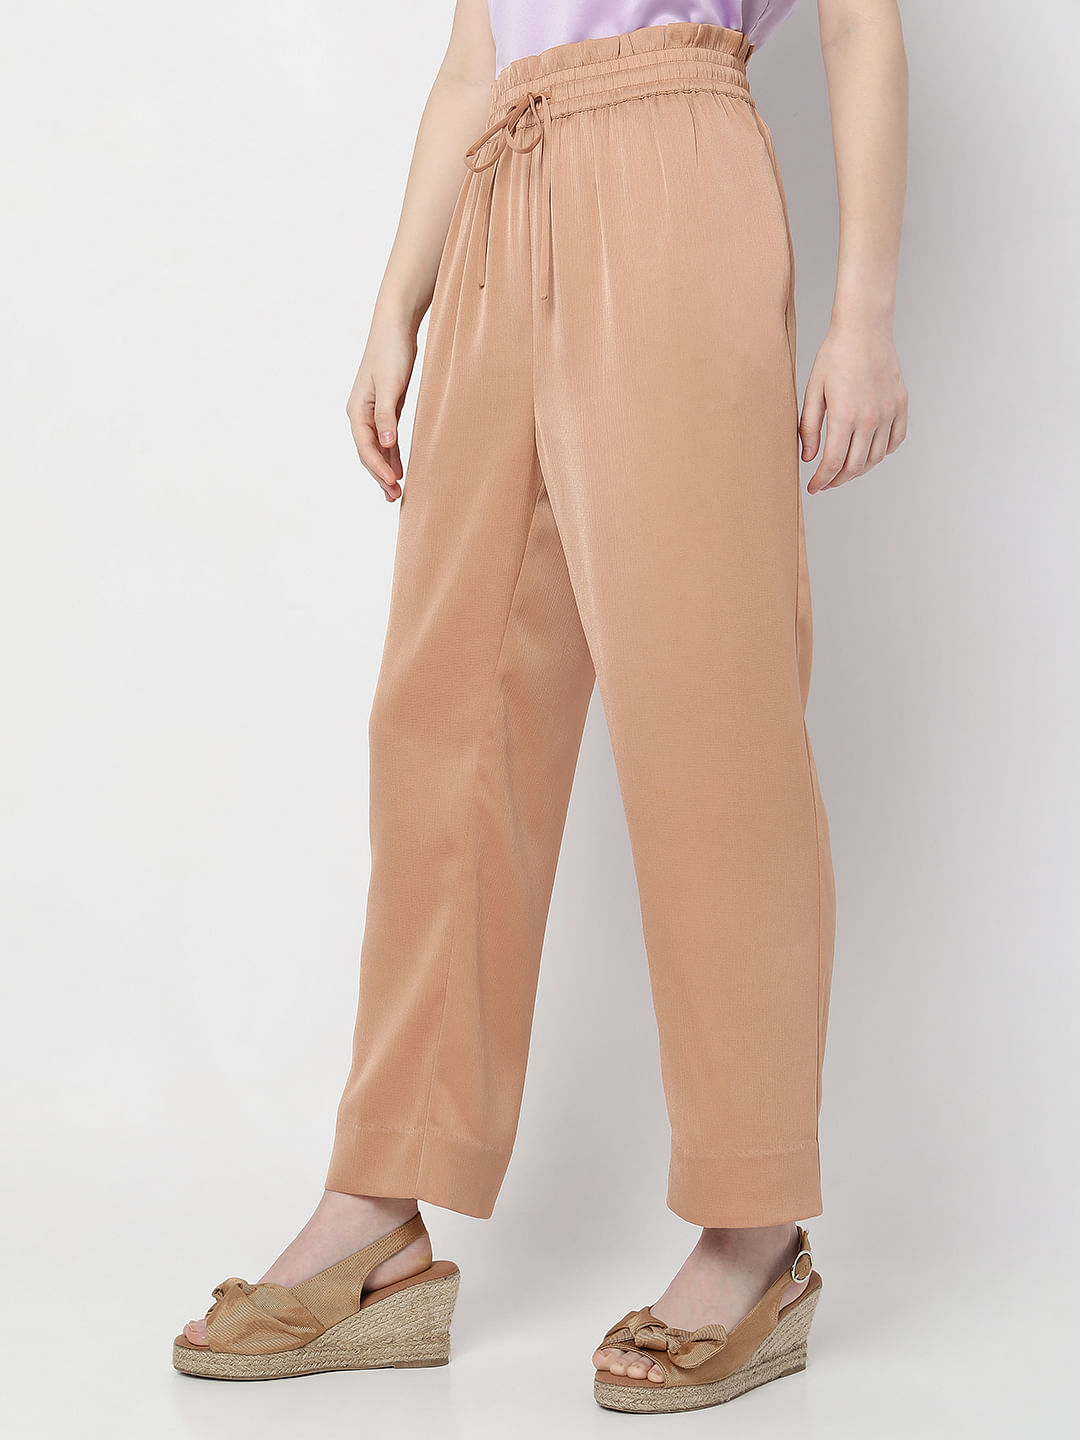 Buy GO COLORS Women Solid Rusty Pink Harem Pants at Amazon.in